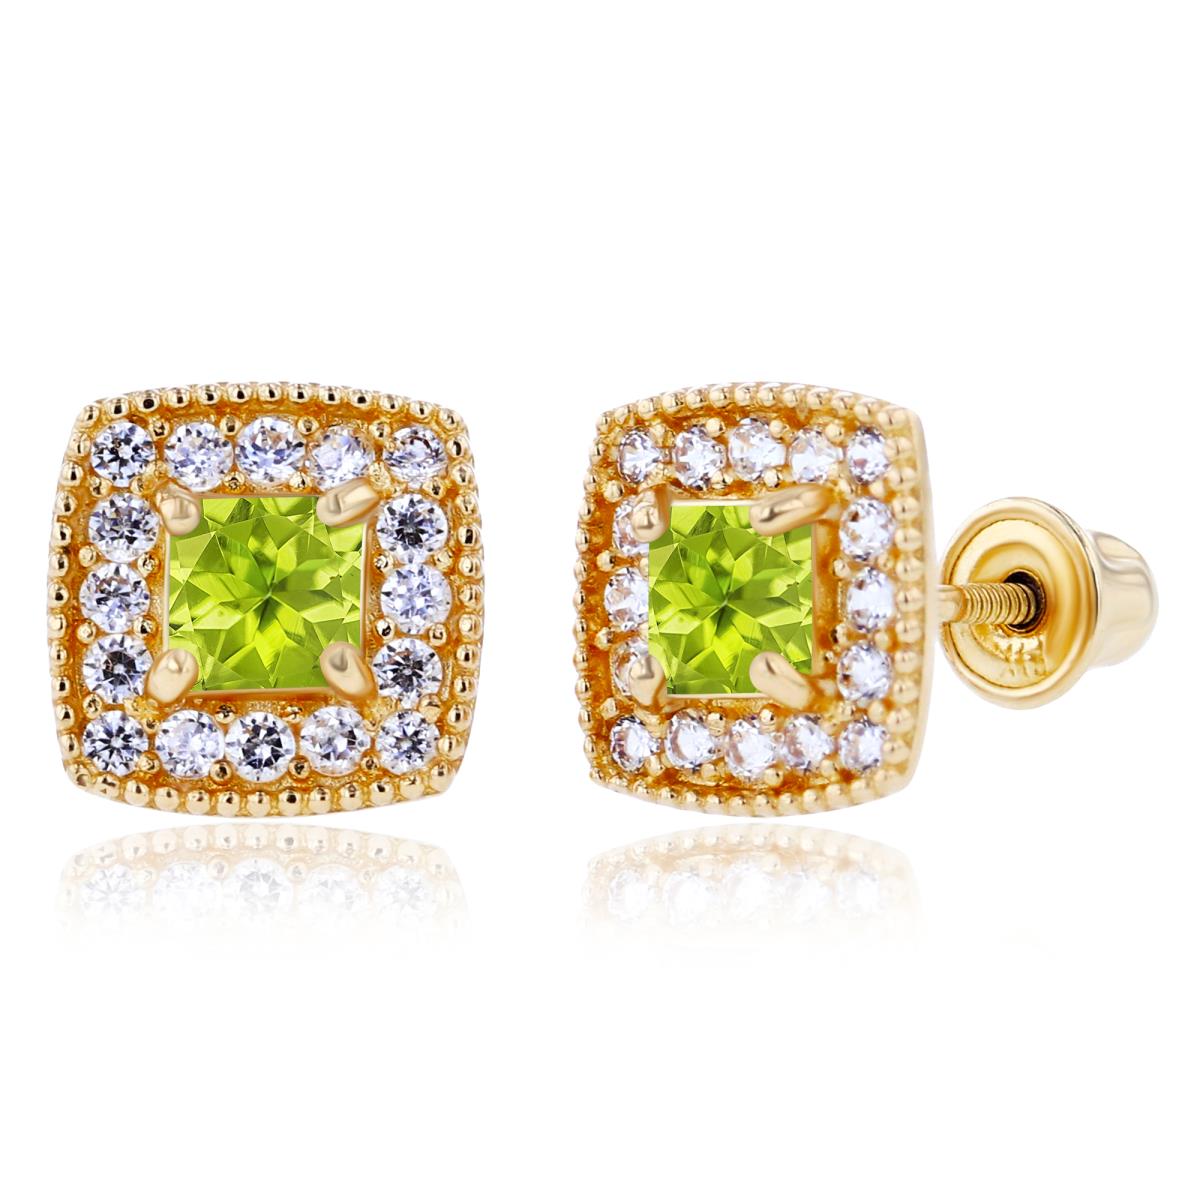 Sterling Silver Yellow 3mm Square Peridot & 1mm Created White Sapphire Cushion Halo Screwback Earrings